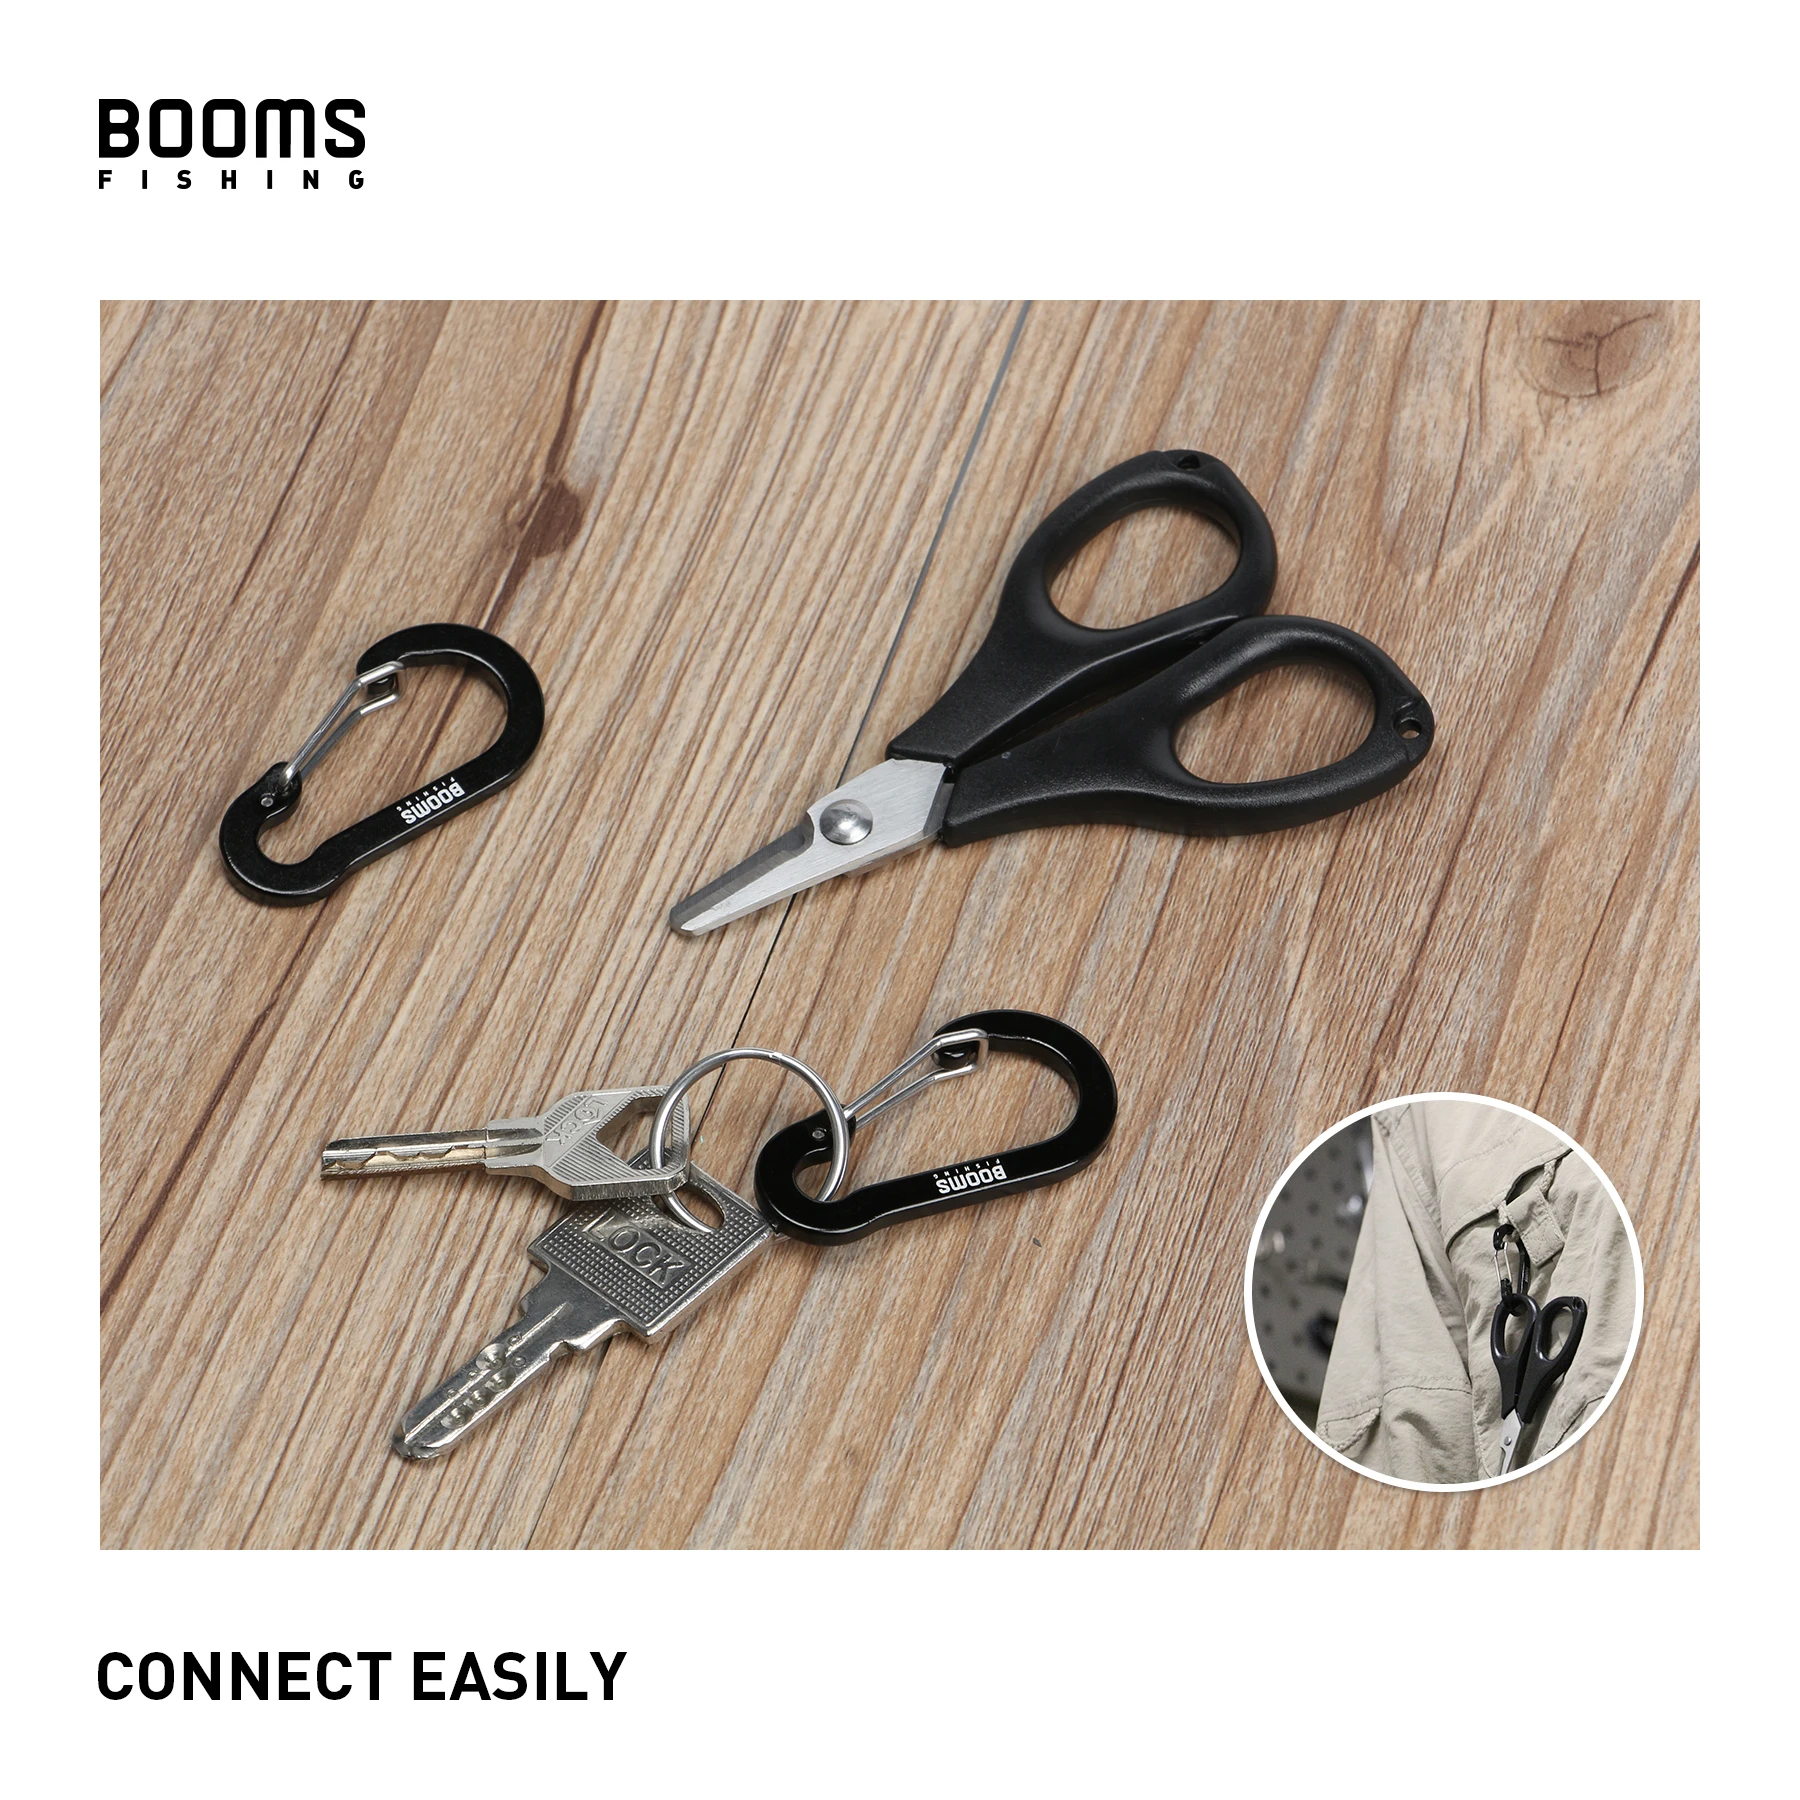 Booms Fishing CC1 Steel Small Carabiner Clips Outdoor Camping  Multi Tool  Fishing Acessories 6pcs